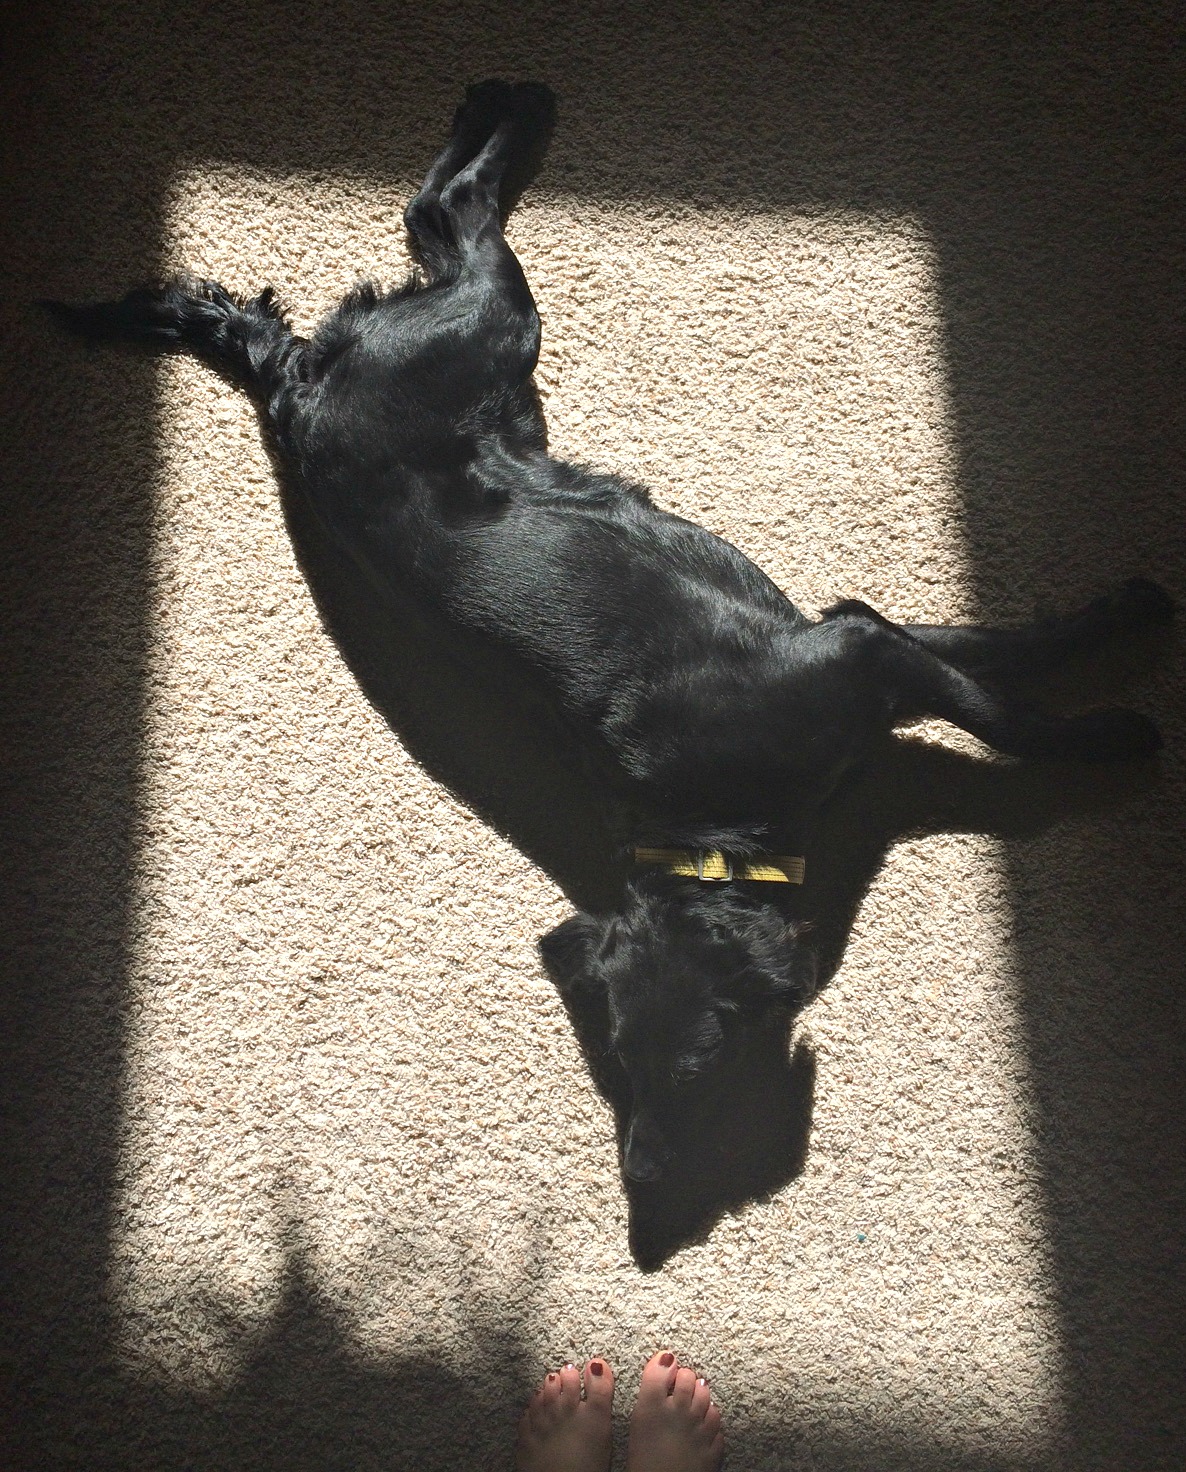 Olive spent her day chasing the sunspot and taking warm naps. #bestdayever